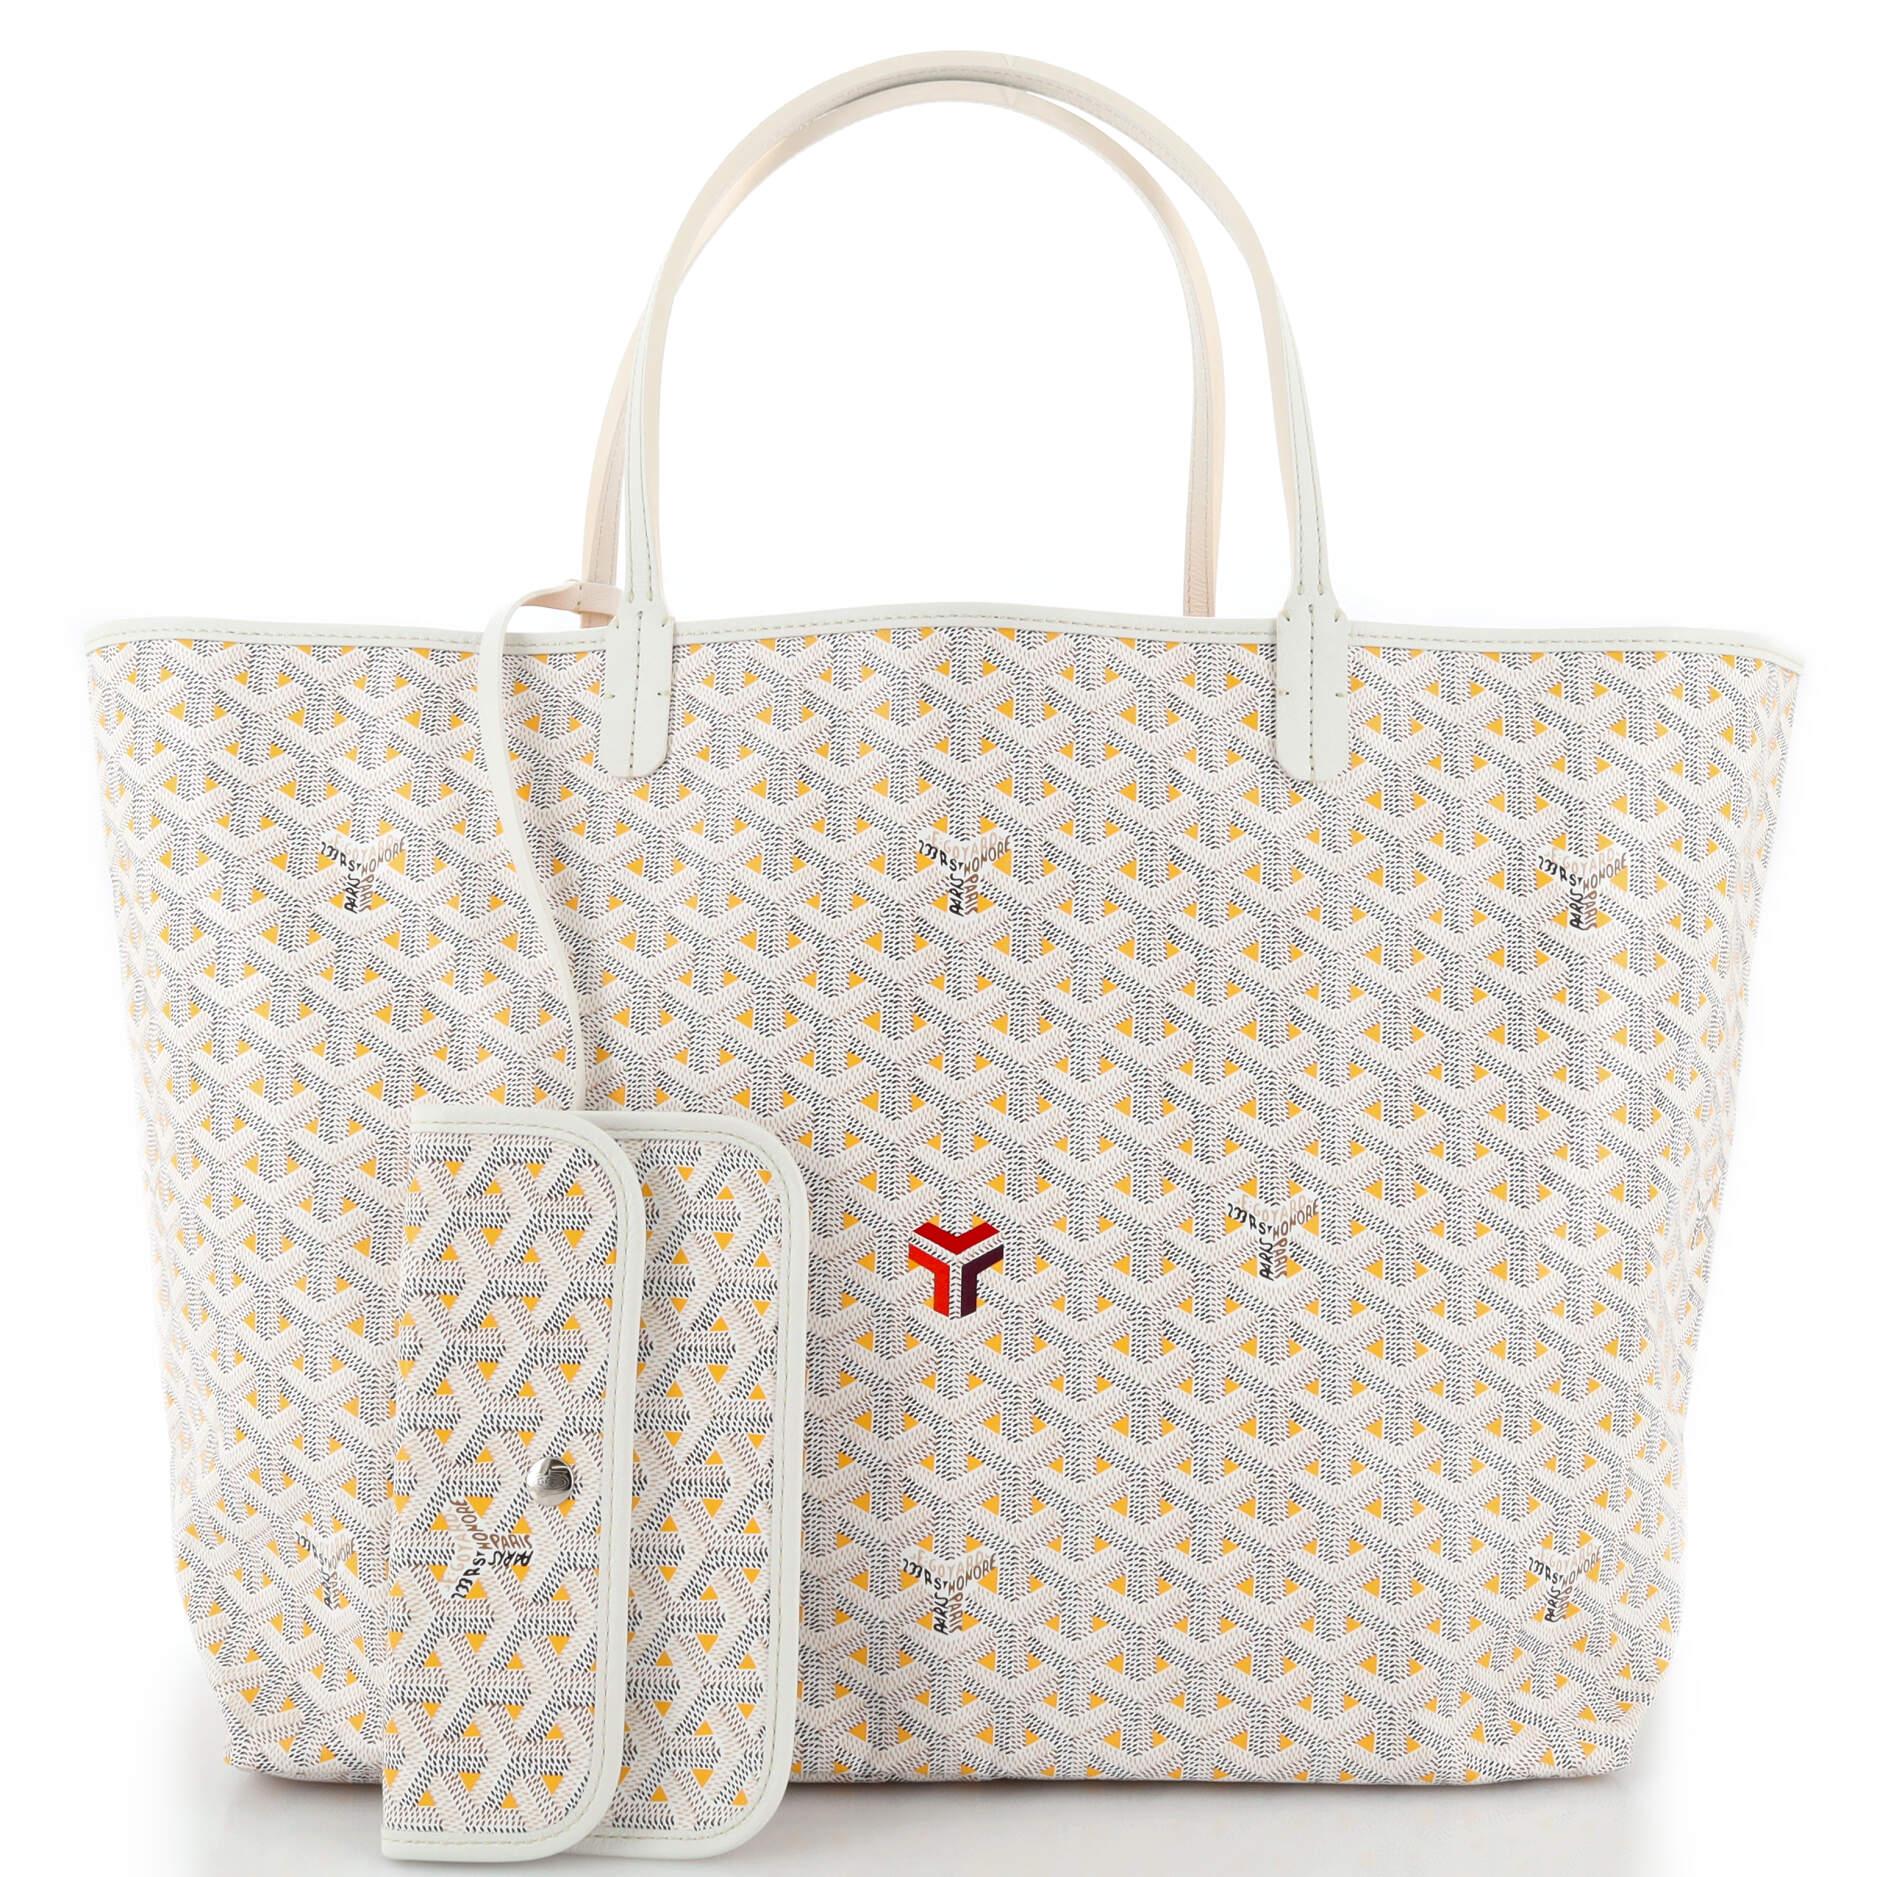 Goyard Claire - For Sale on 1stDibs